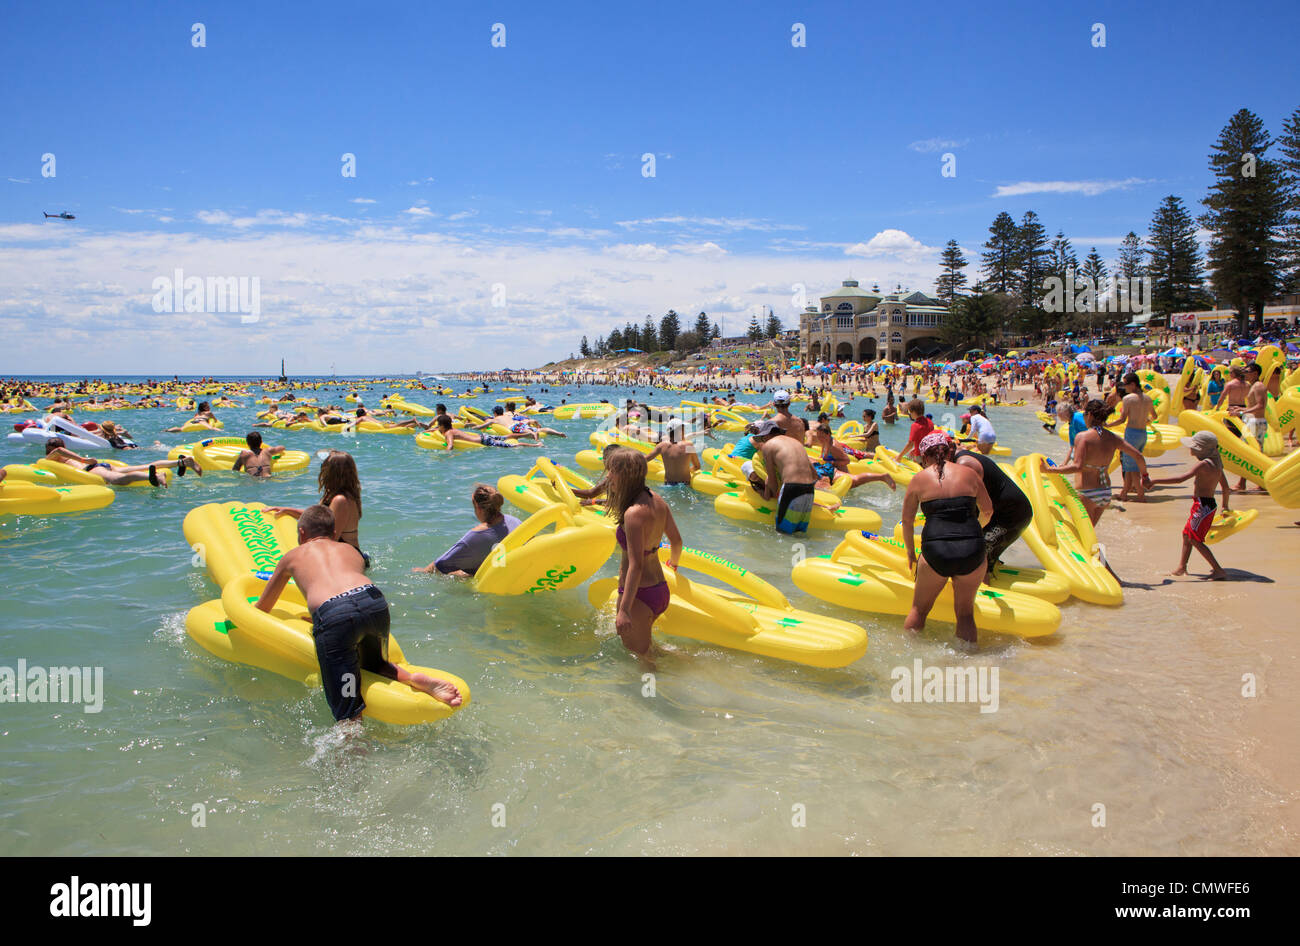 Beach Inflatables High Resolution Stock Photography and Images - Alamy